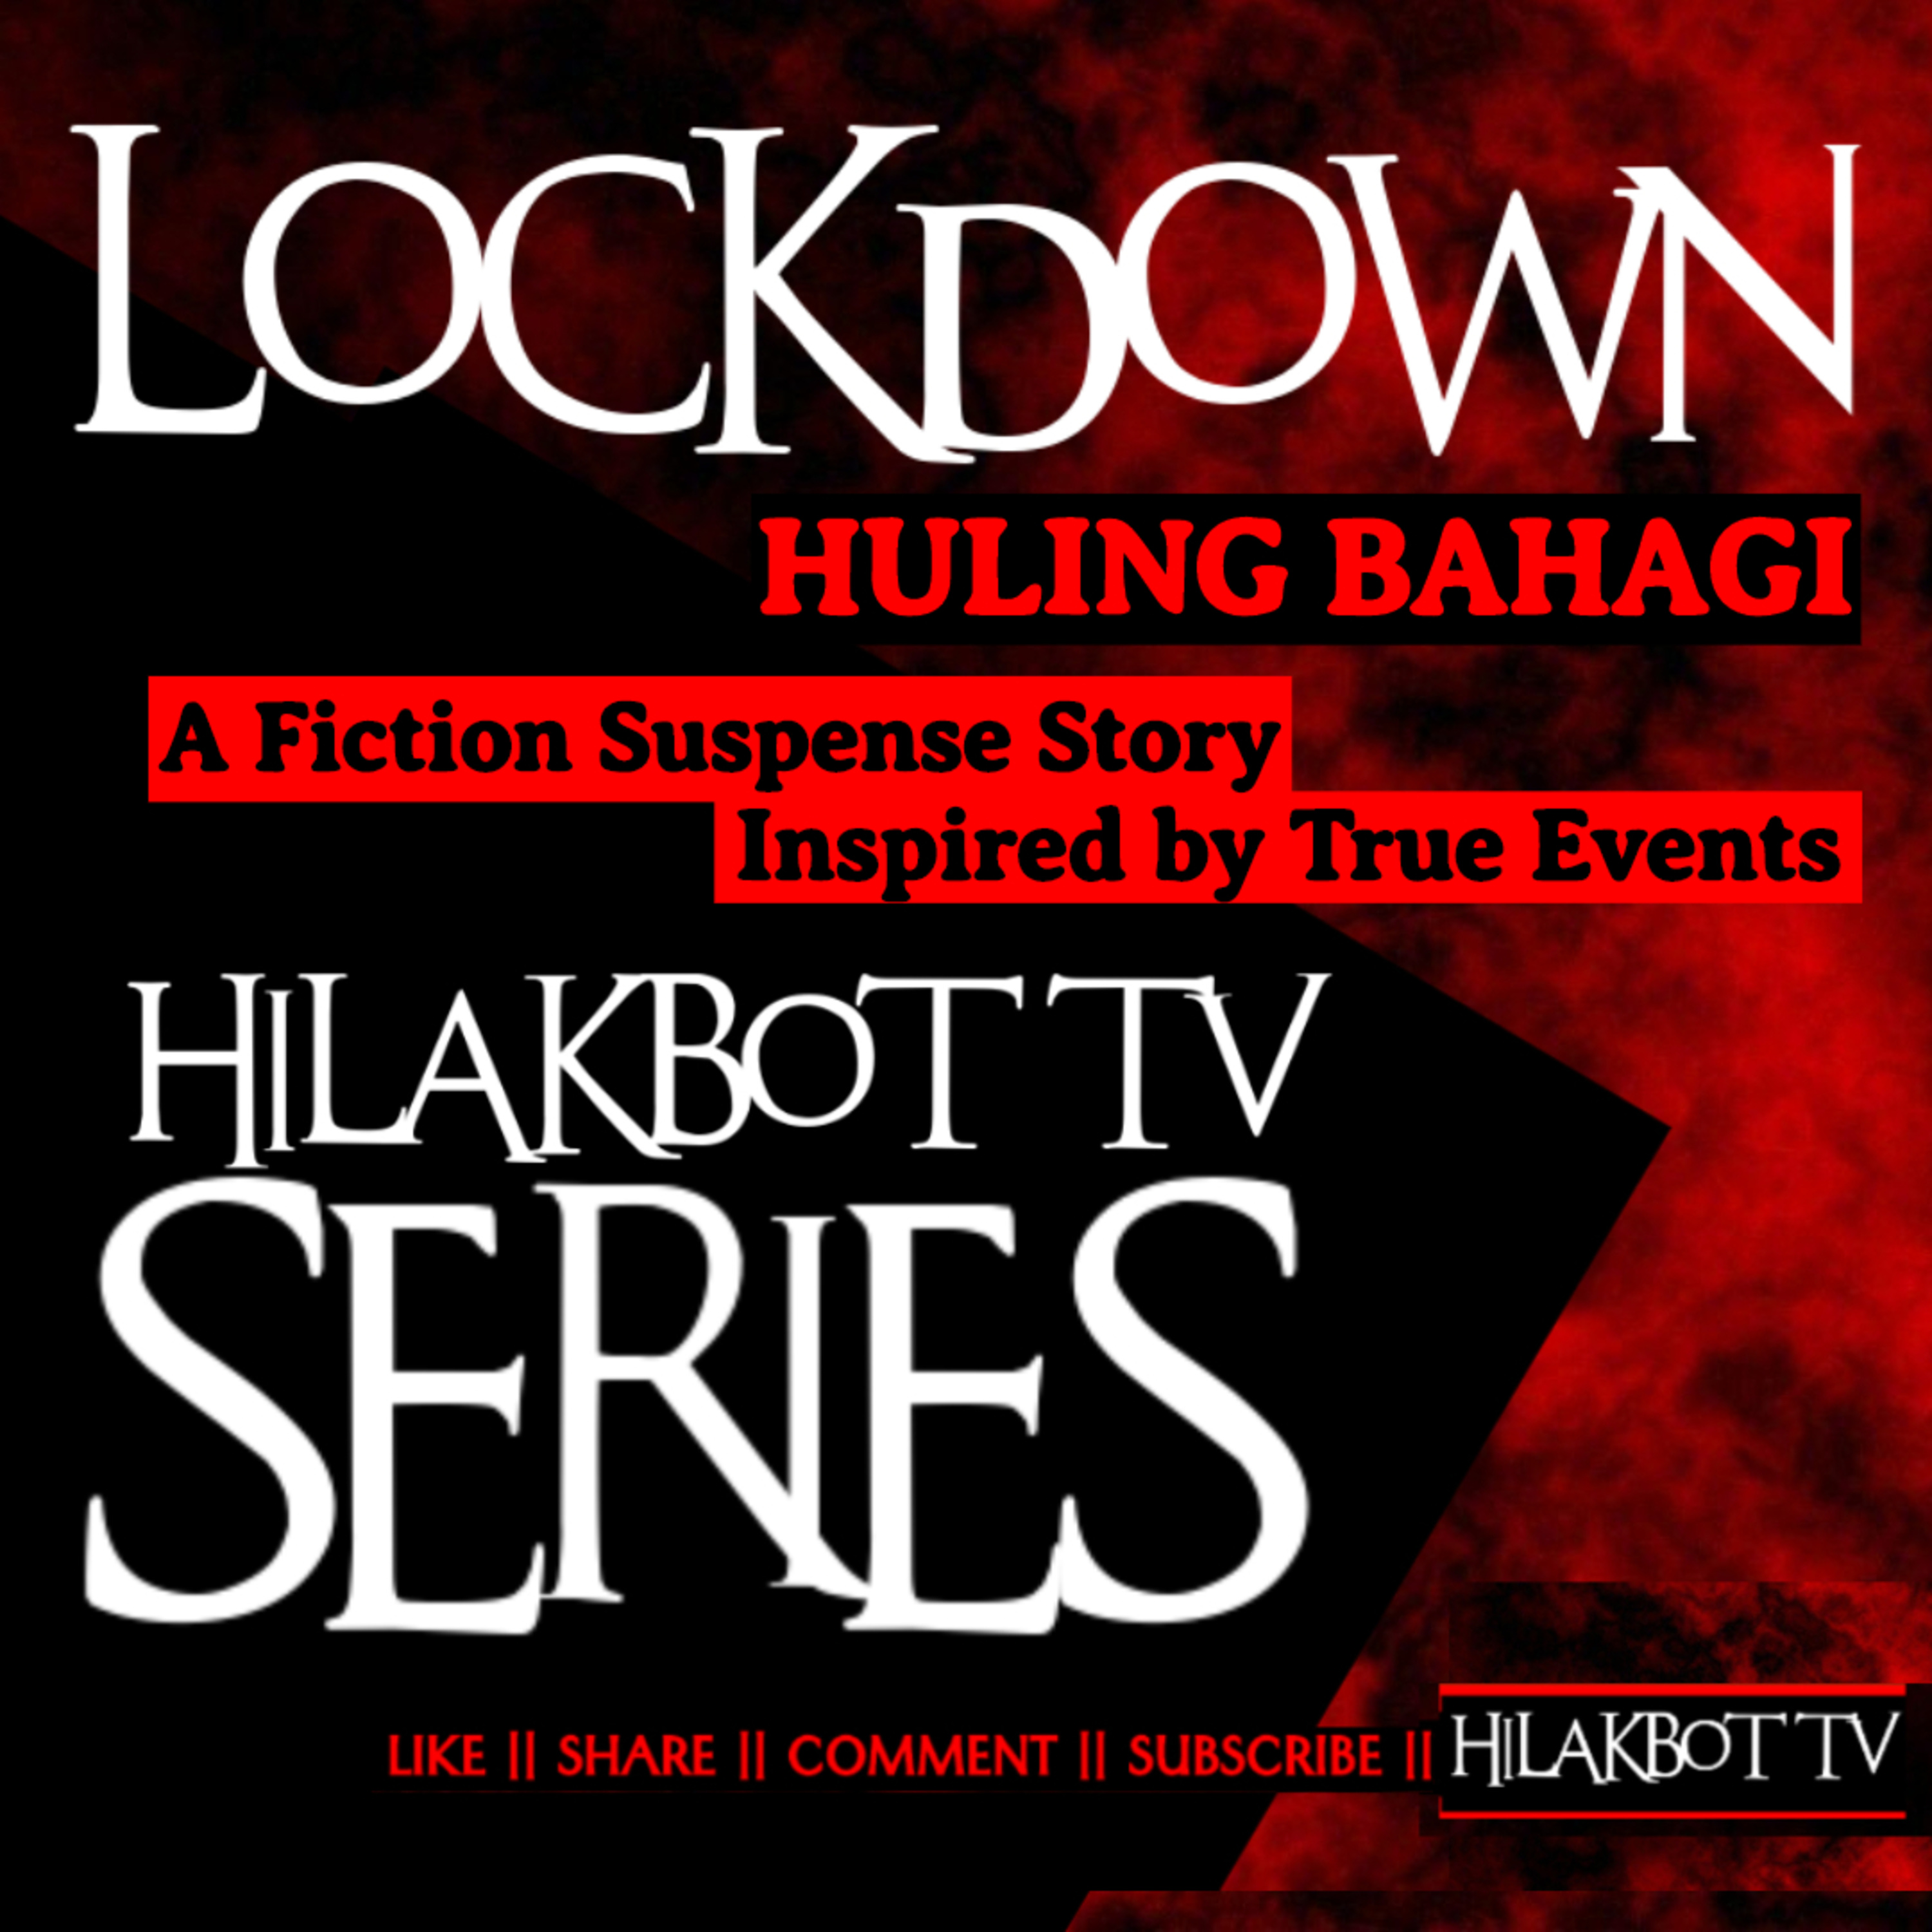 Tagalog Horror Story - WUHAN LOCKDOWN FINALE (Fiction Suspense Story Inspired by True Events) || HILAKBOT TV